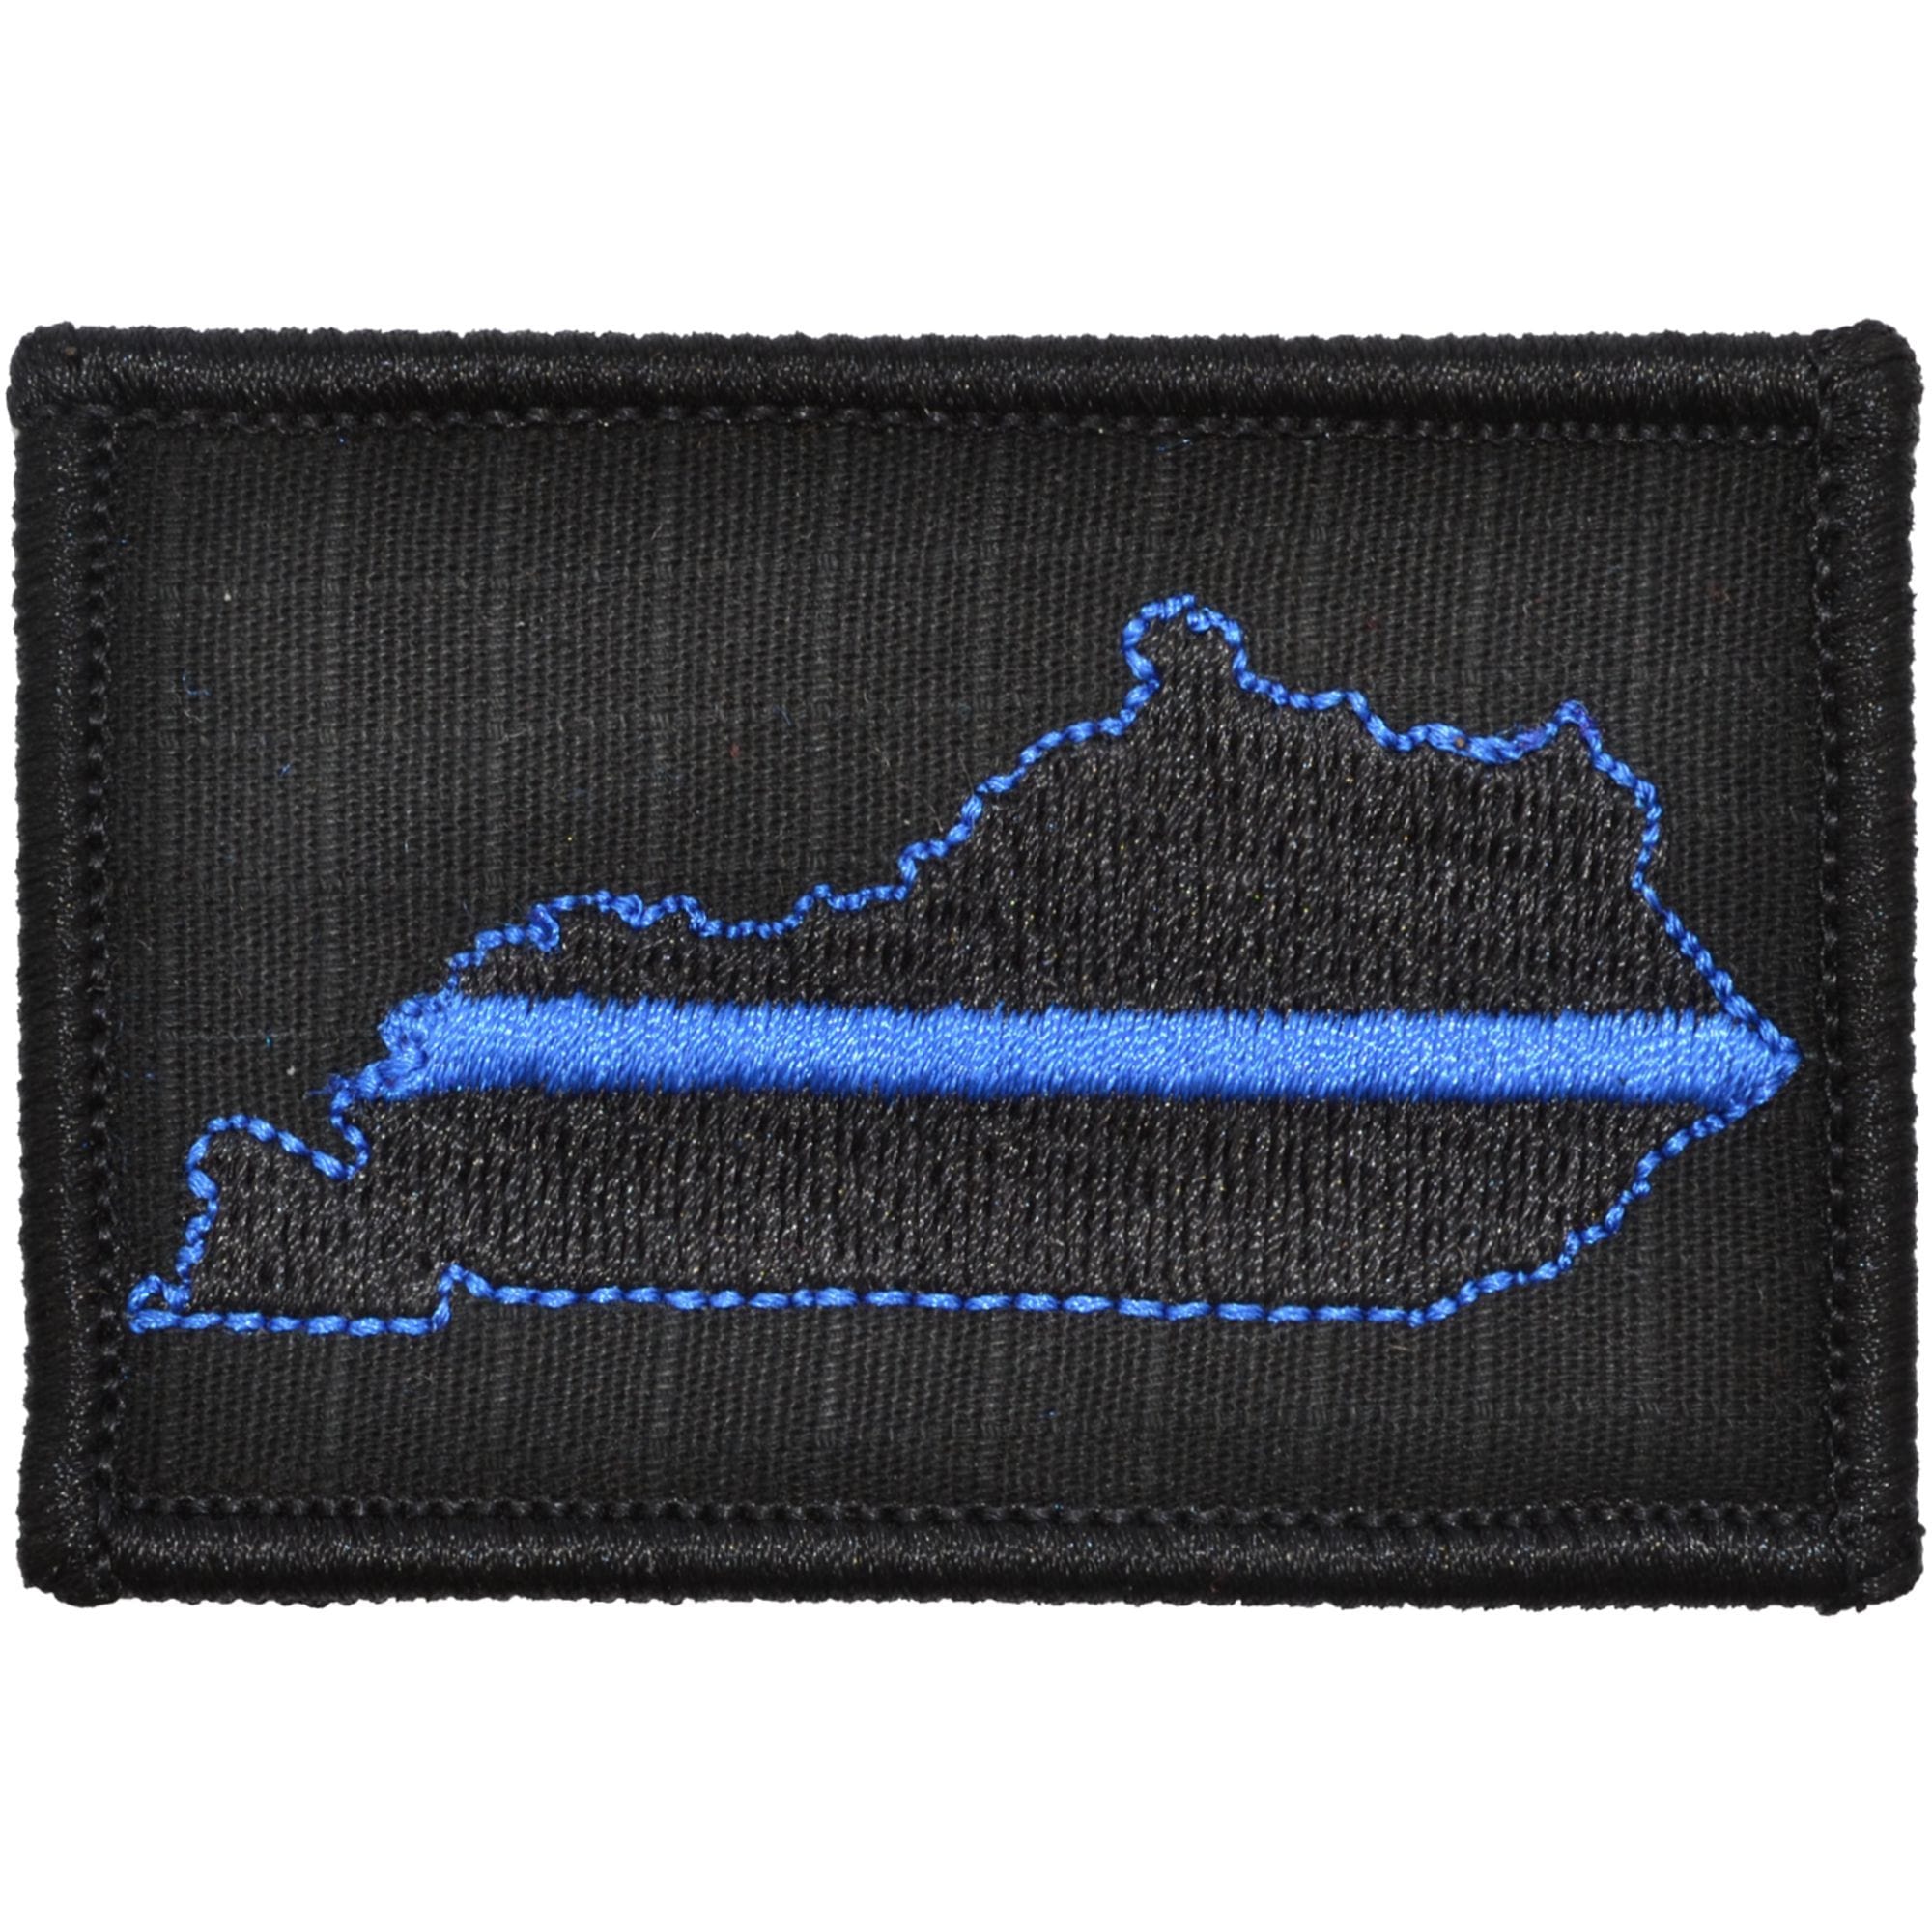 Tactical Gear Junkie Patches Black Kentucky State - Thin Blue Line - 2x3 Patch